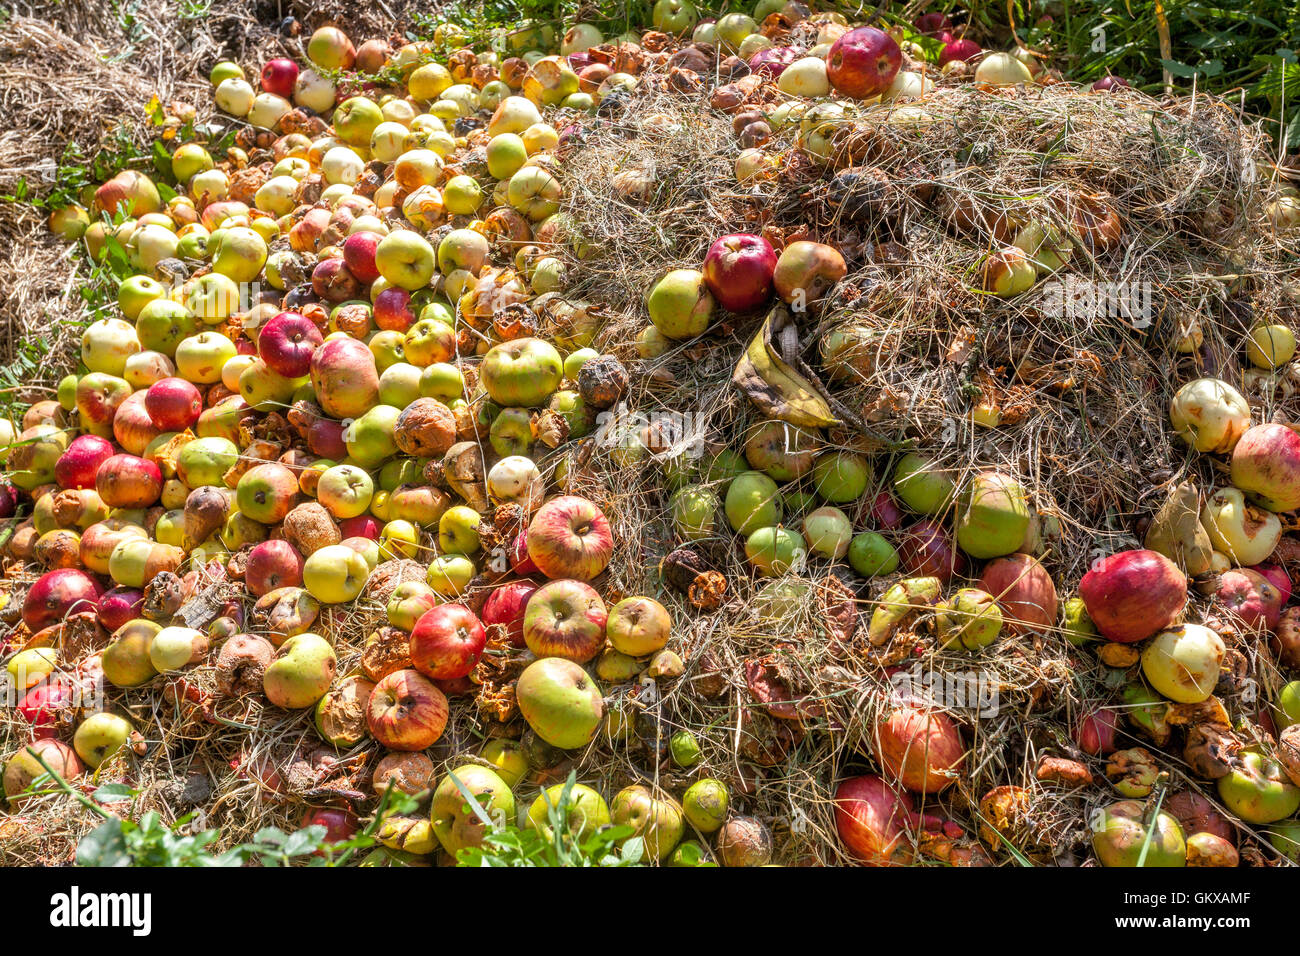 Compost pile of rotting apples, composting fruits in the garden Stock Photo